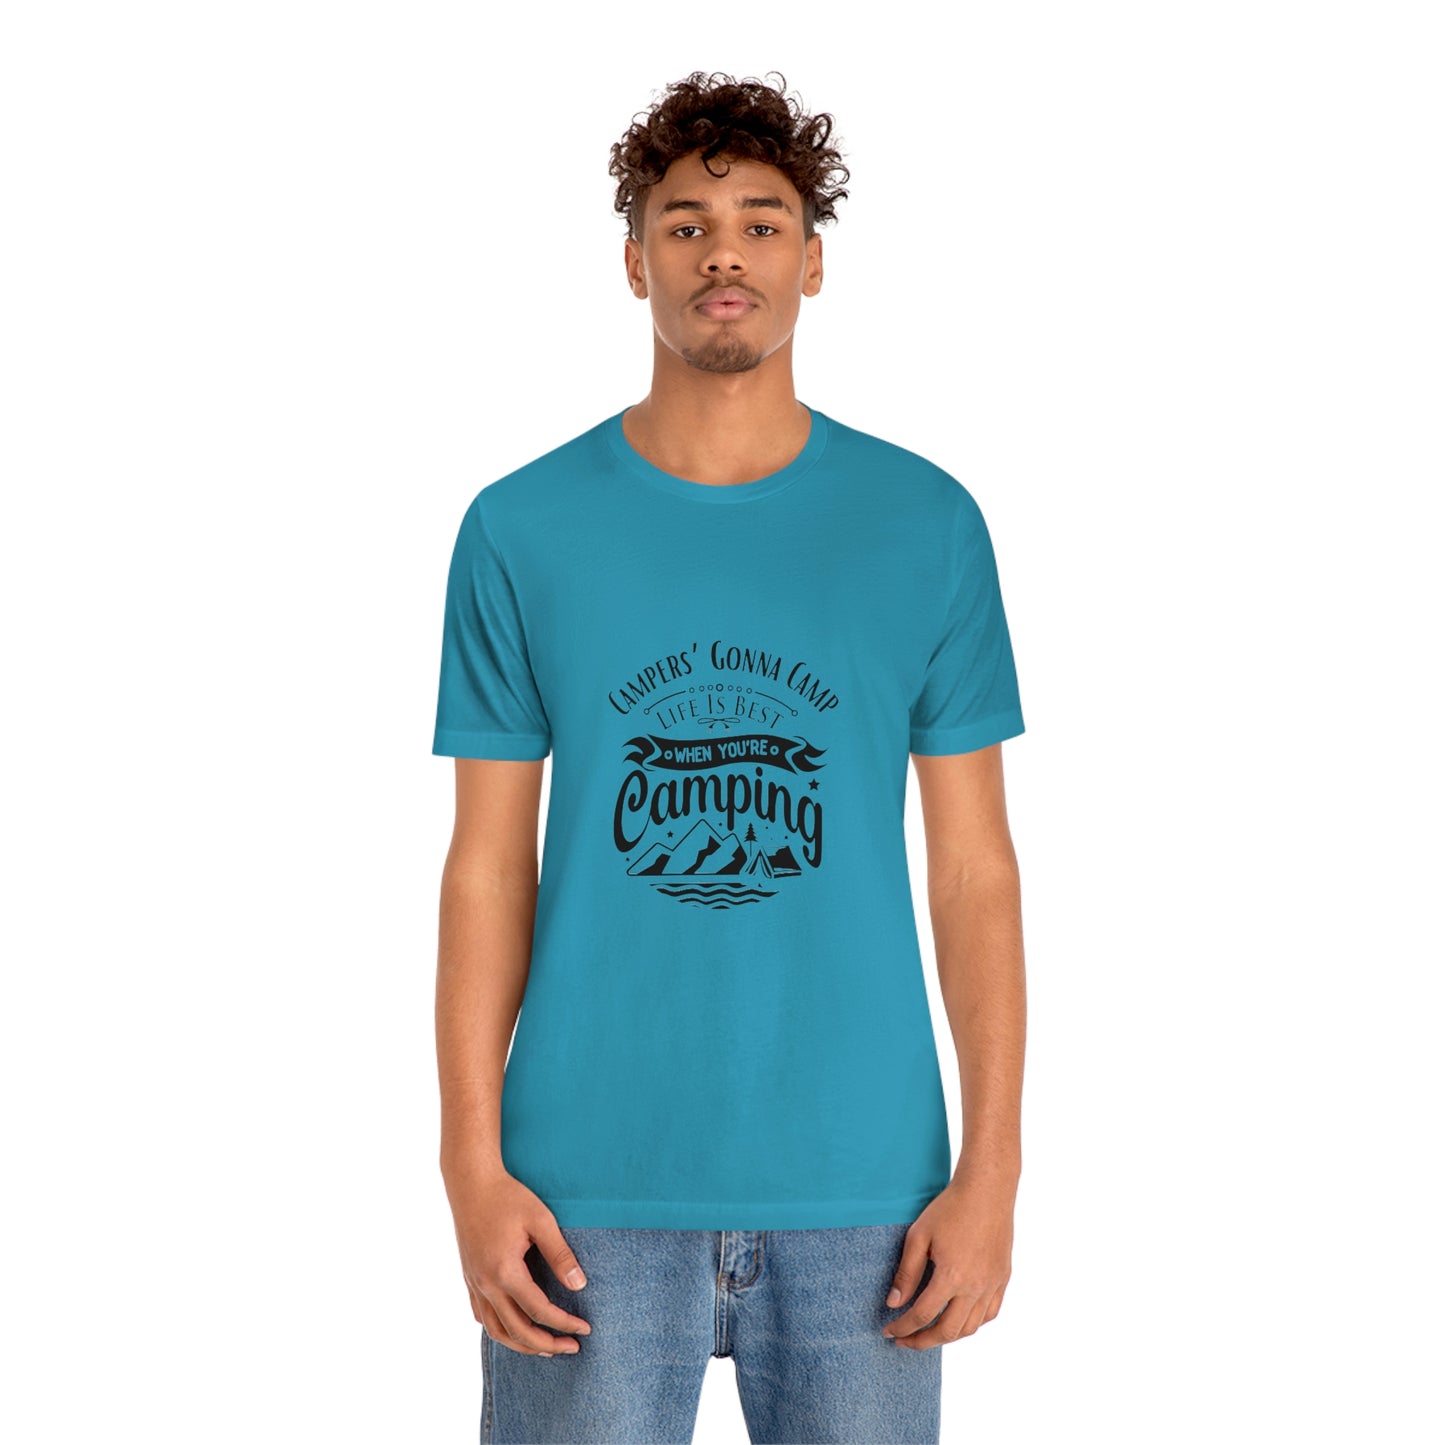 ‘Campers gonna camp’ Unisex Jersey Short Sleeve Tee